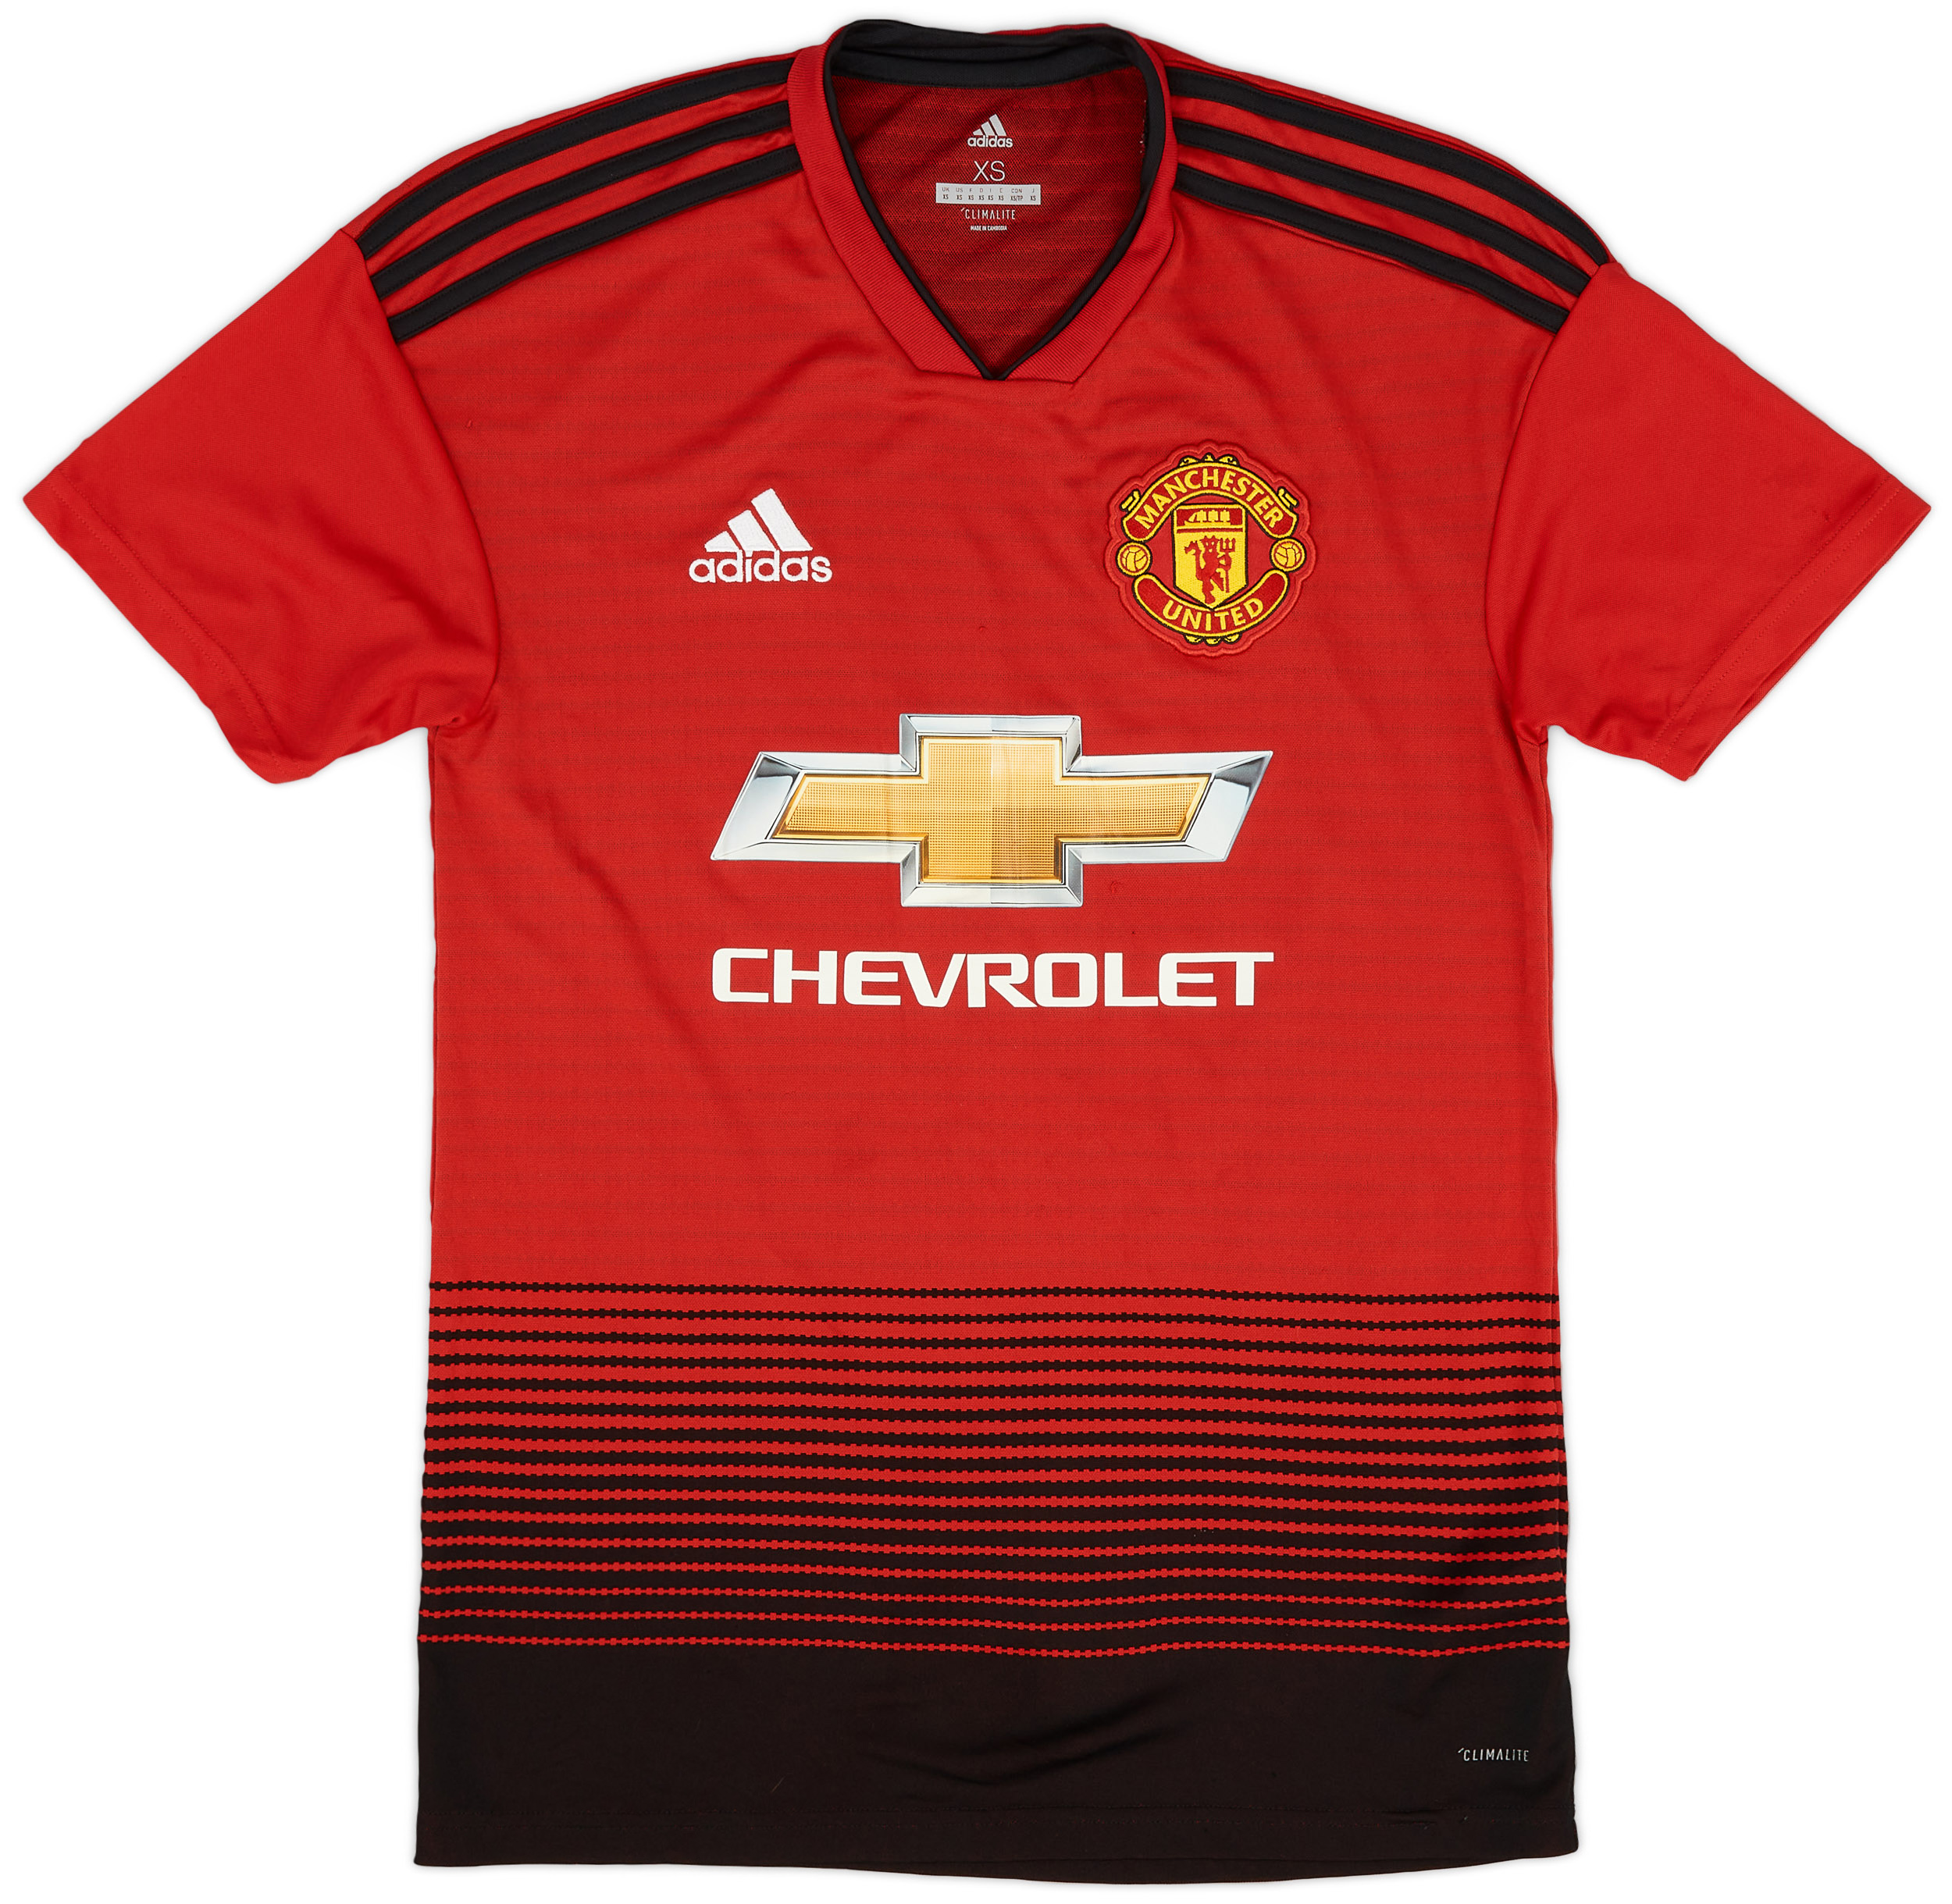 2018-19 Manchester United Home Shirt - 5/10 - ()